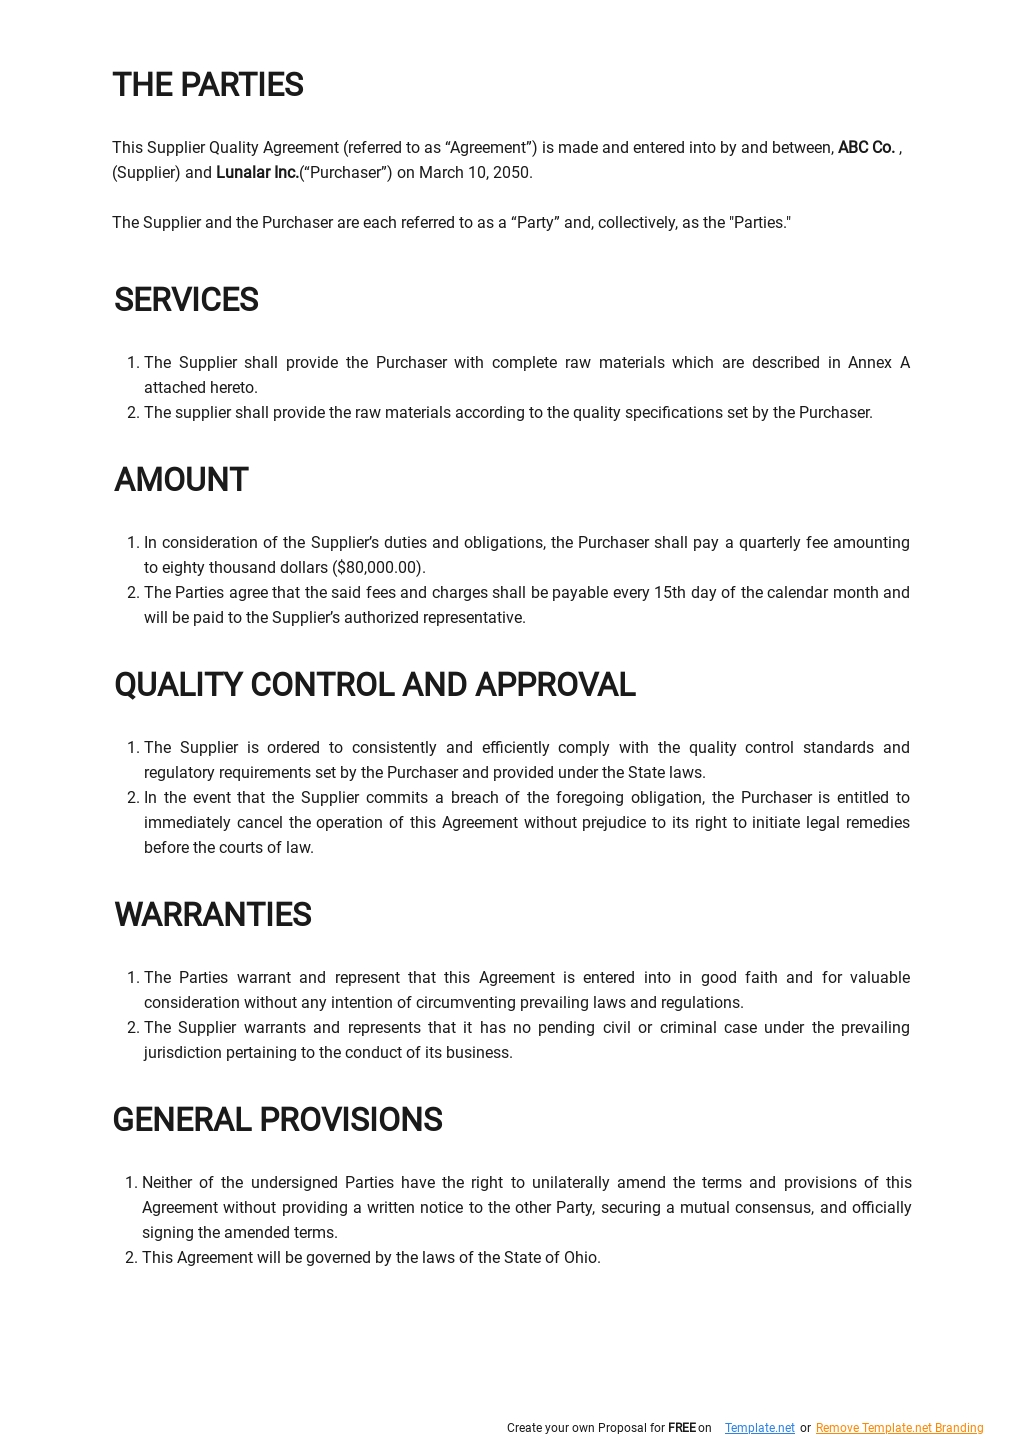 Supplier Quality Agreement Template  Google Docs, Word  Template.net With Regard To supplier quality agreement template